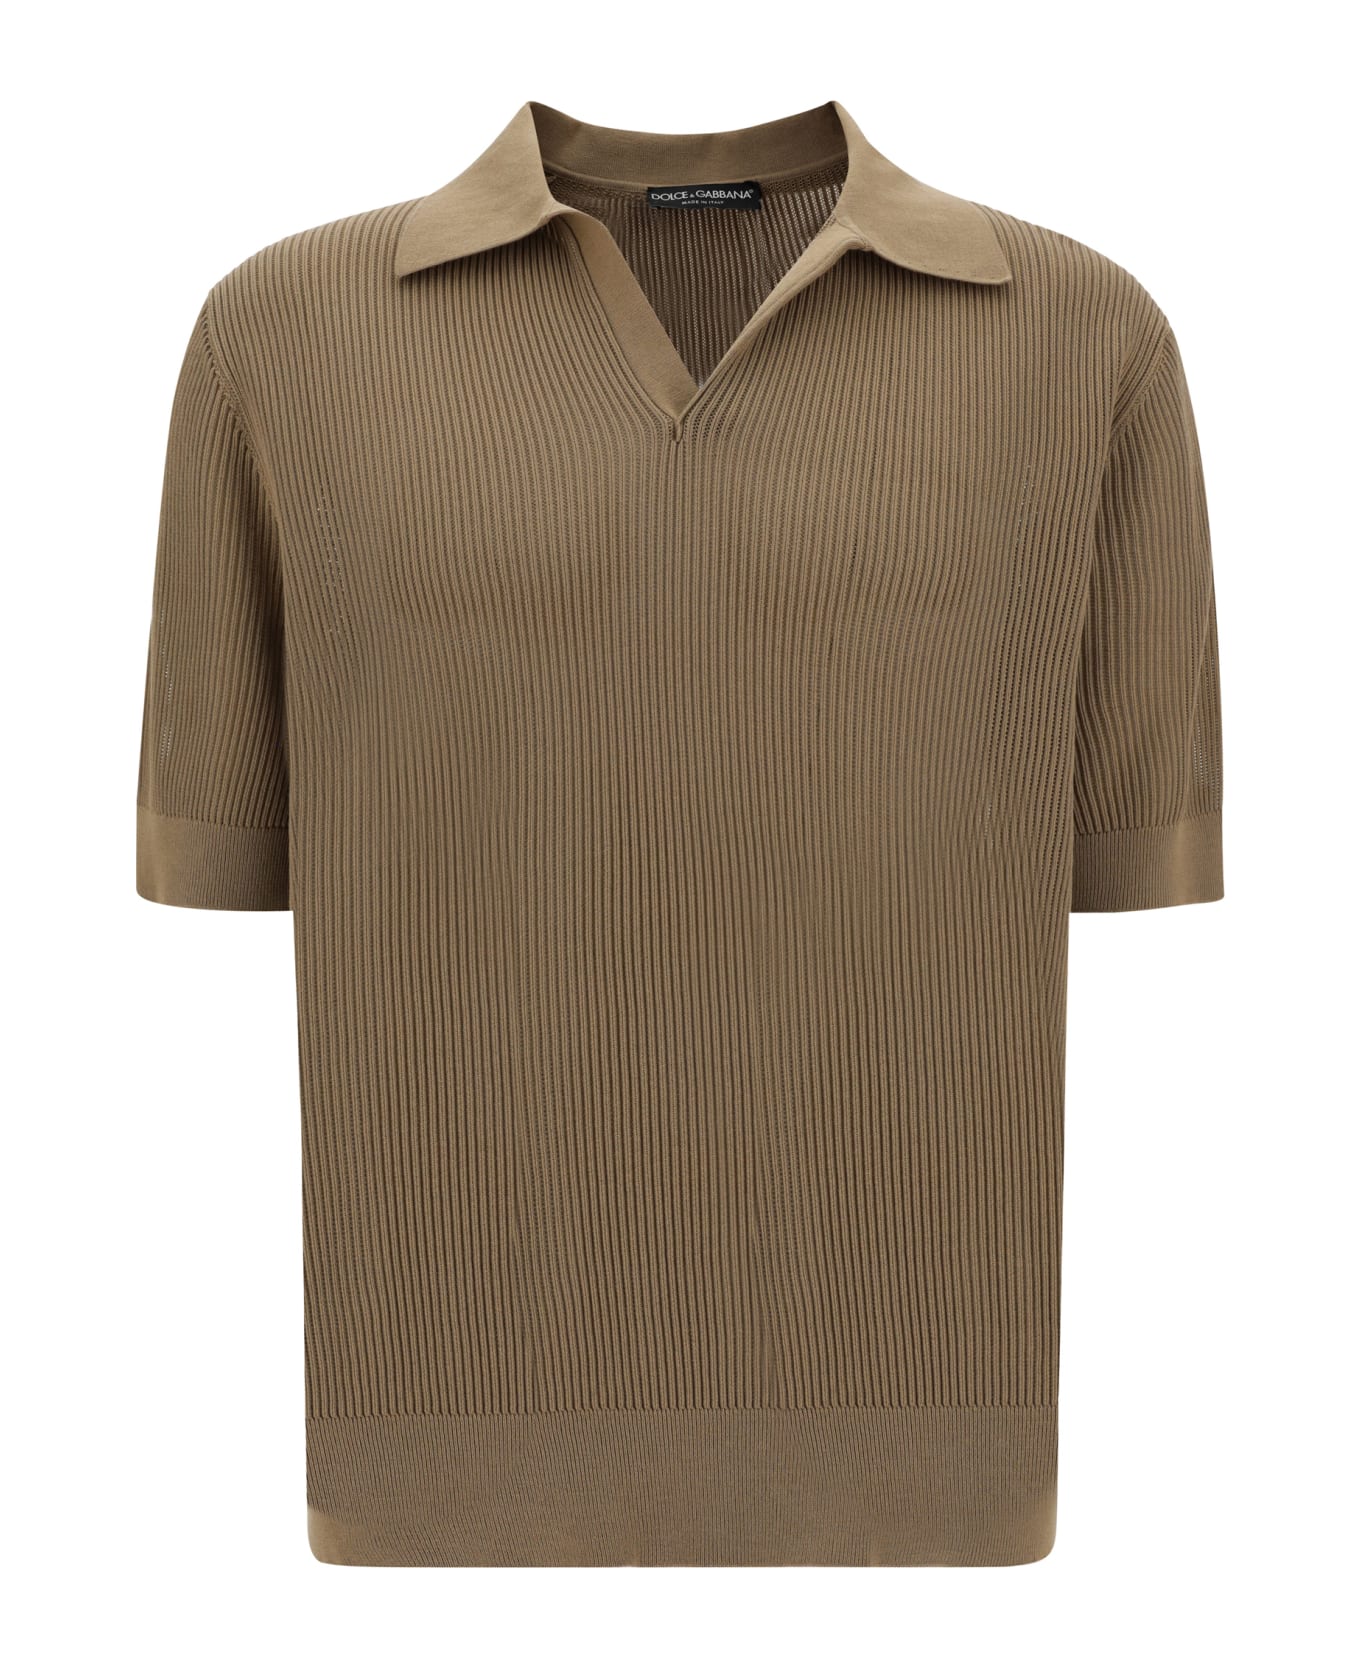 Dolce & Gabbana Perforated Cotton Polo Shirt - Beige ポロシャツ